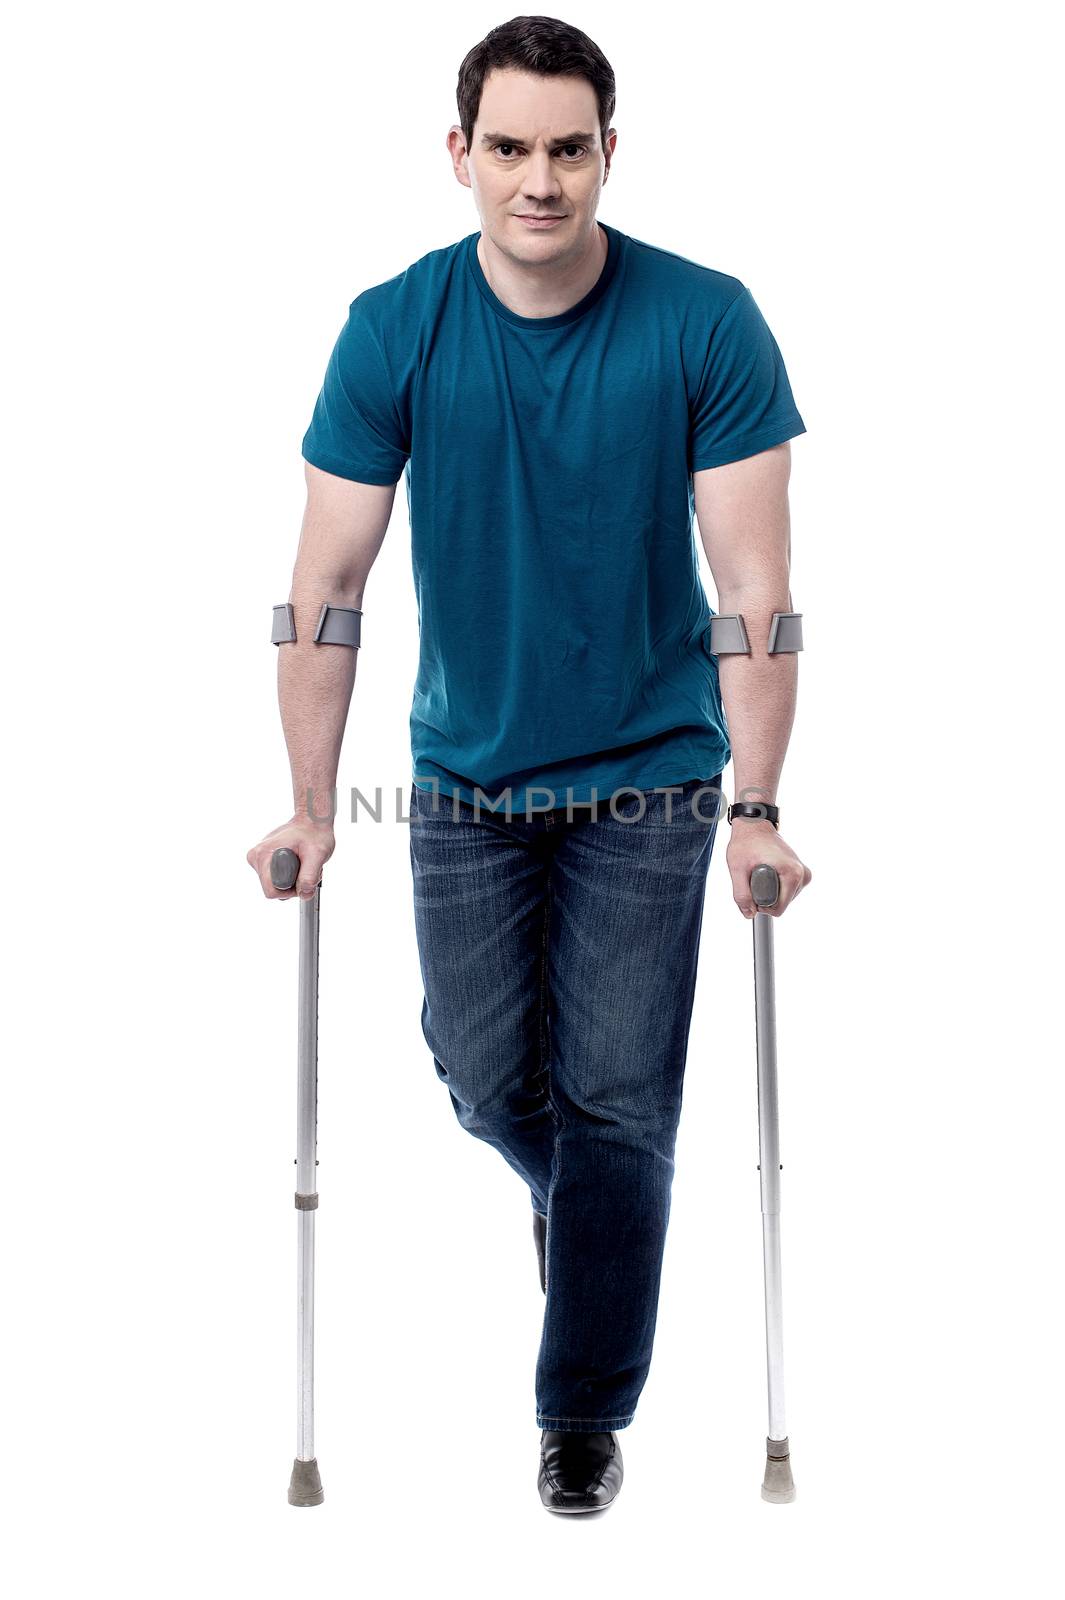 I am recovering from leg injury. by stockyimages